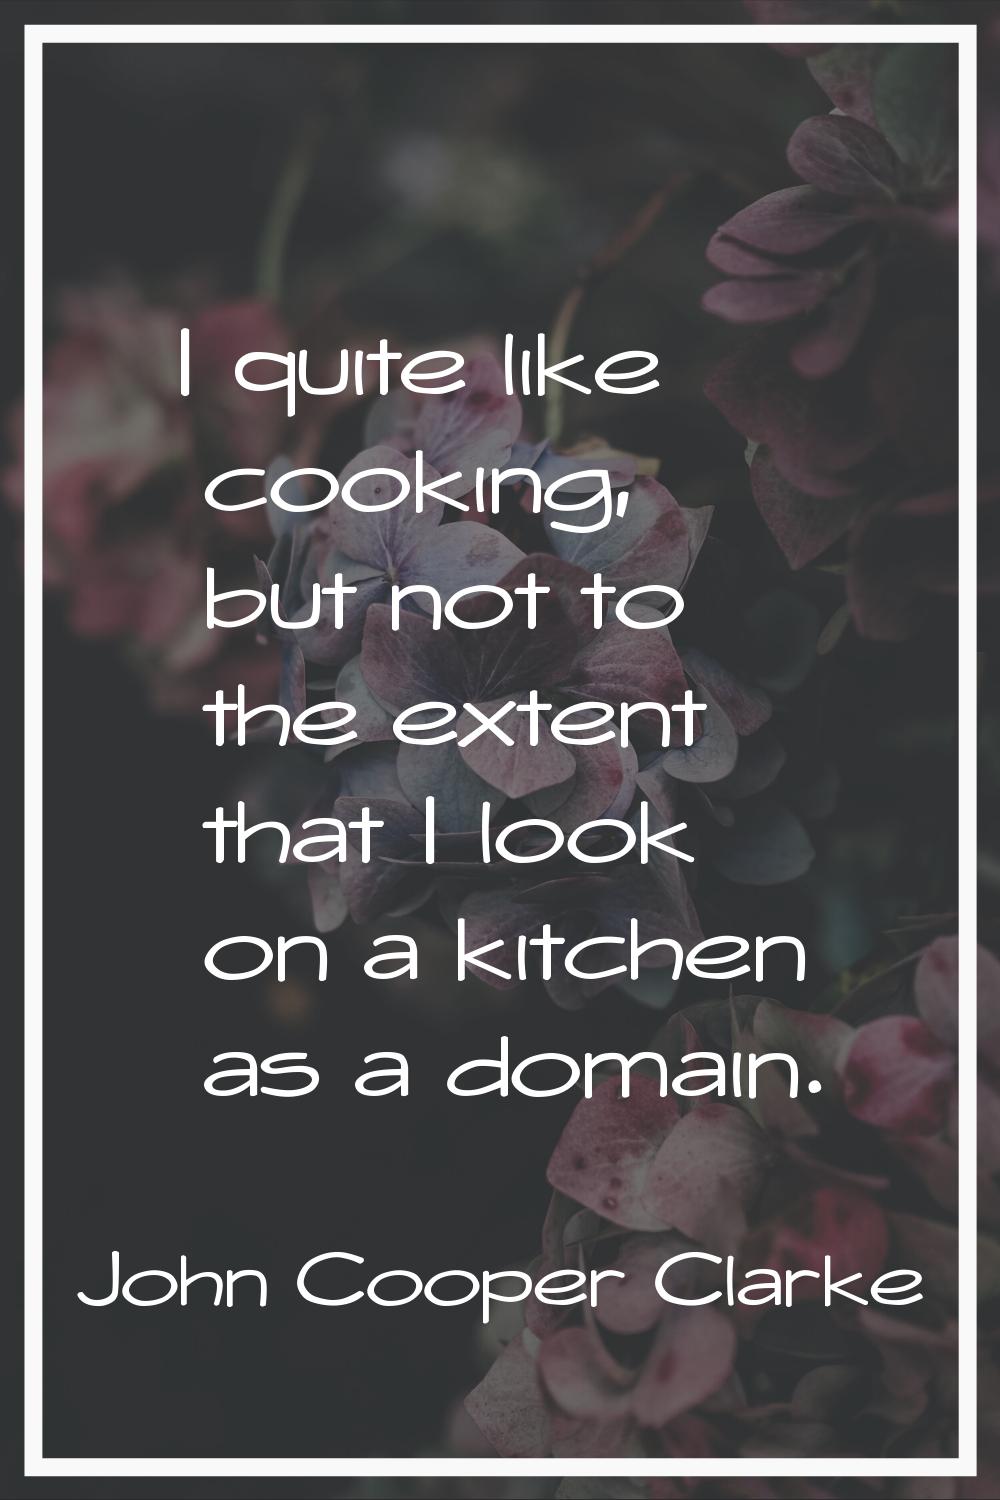 I quite like cooking, but not to the extent that I look on a kitchen as a domain.